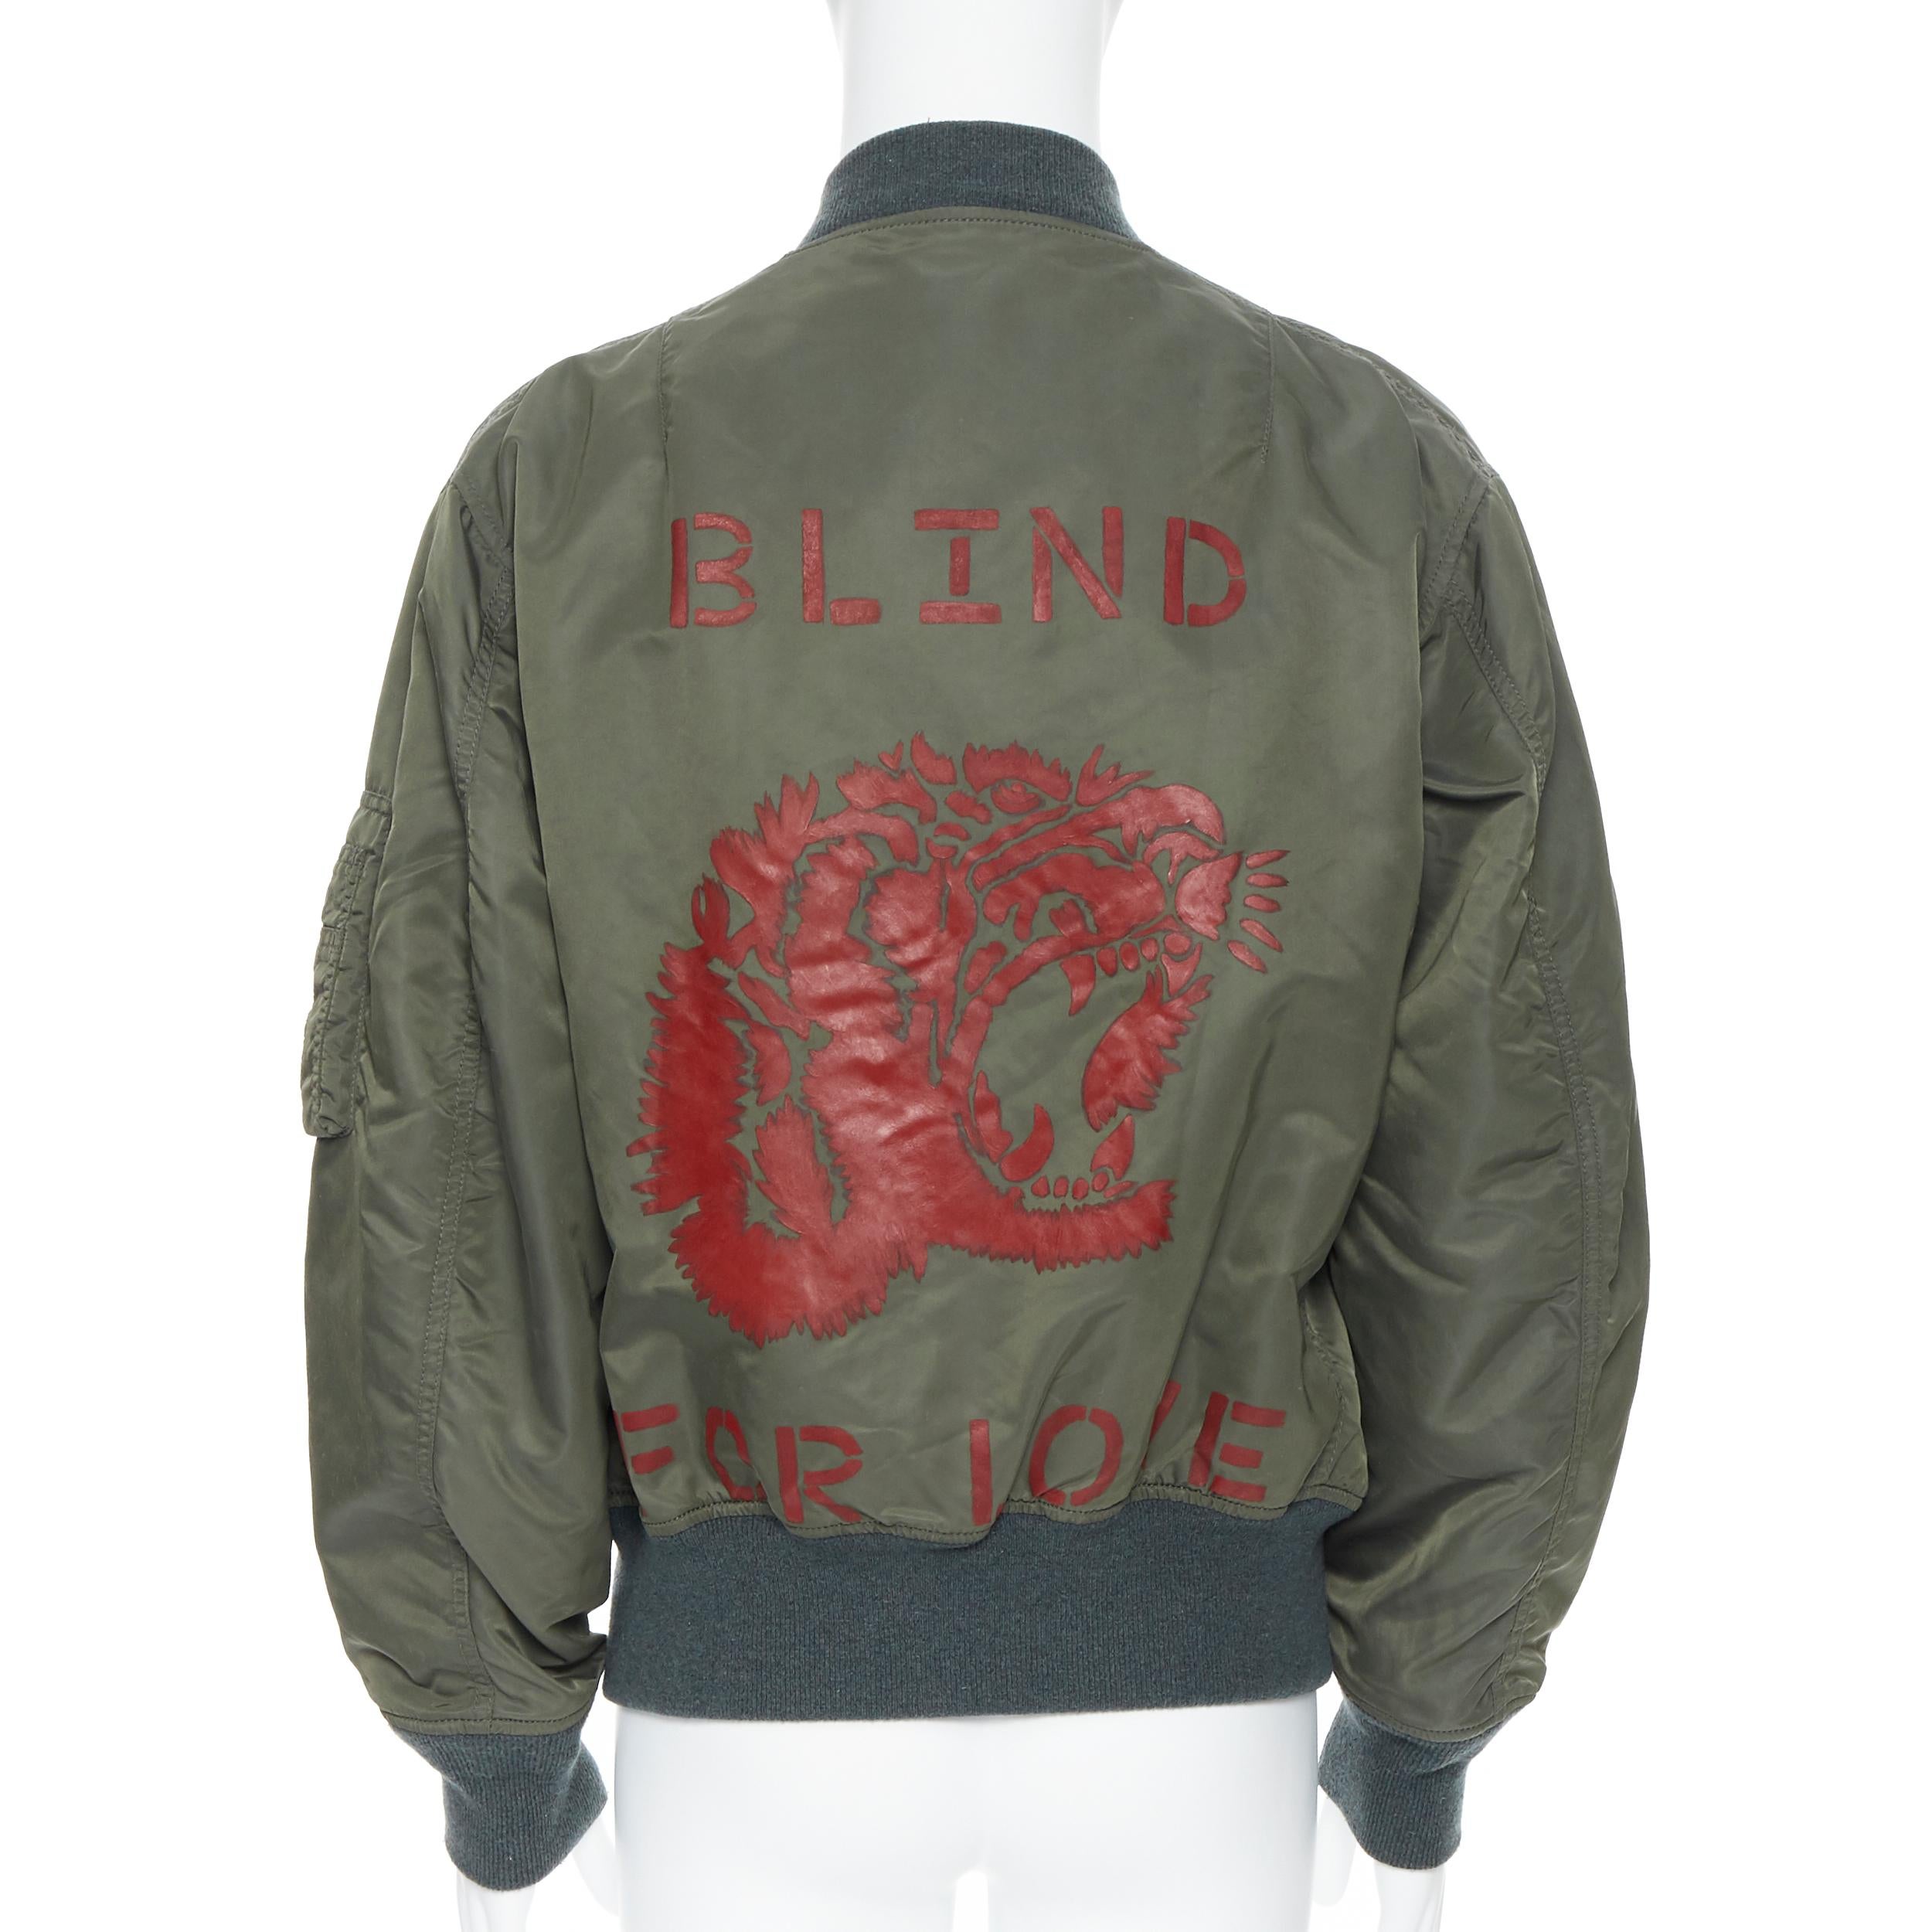 GUCCI Reversible green nylon swallow embroidered MA-1 padded bomber jacket IT48
Brand: Gucci
Designer: Alessandro Michele
Model Name / Style: MA-1 bomber
Material: Polyamide
Color: Green
Pattern: Solid
Closure: Zip
Extra Detail: Reversible.